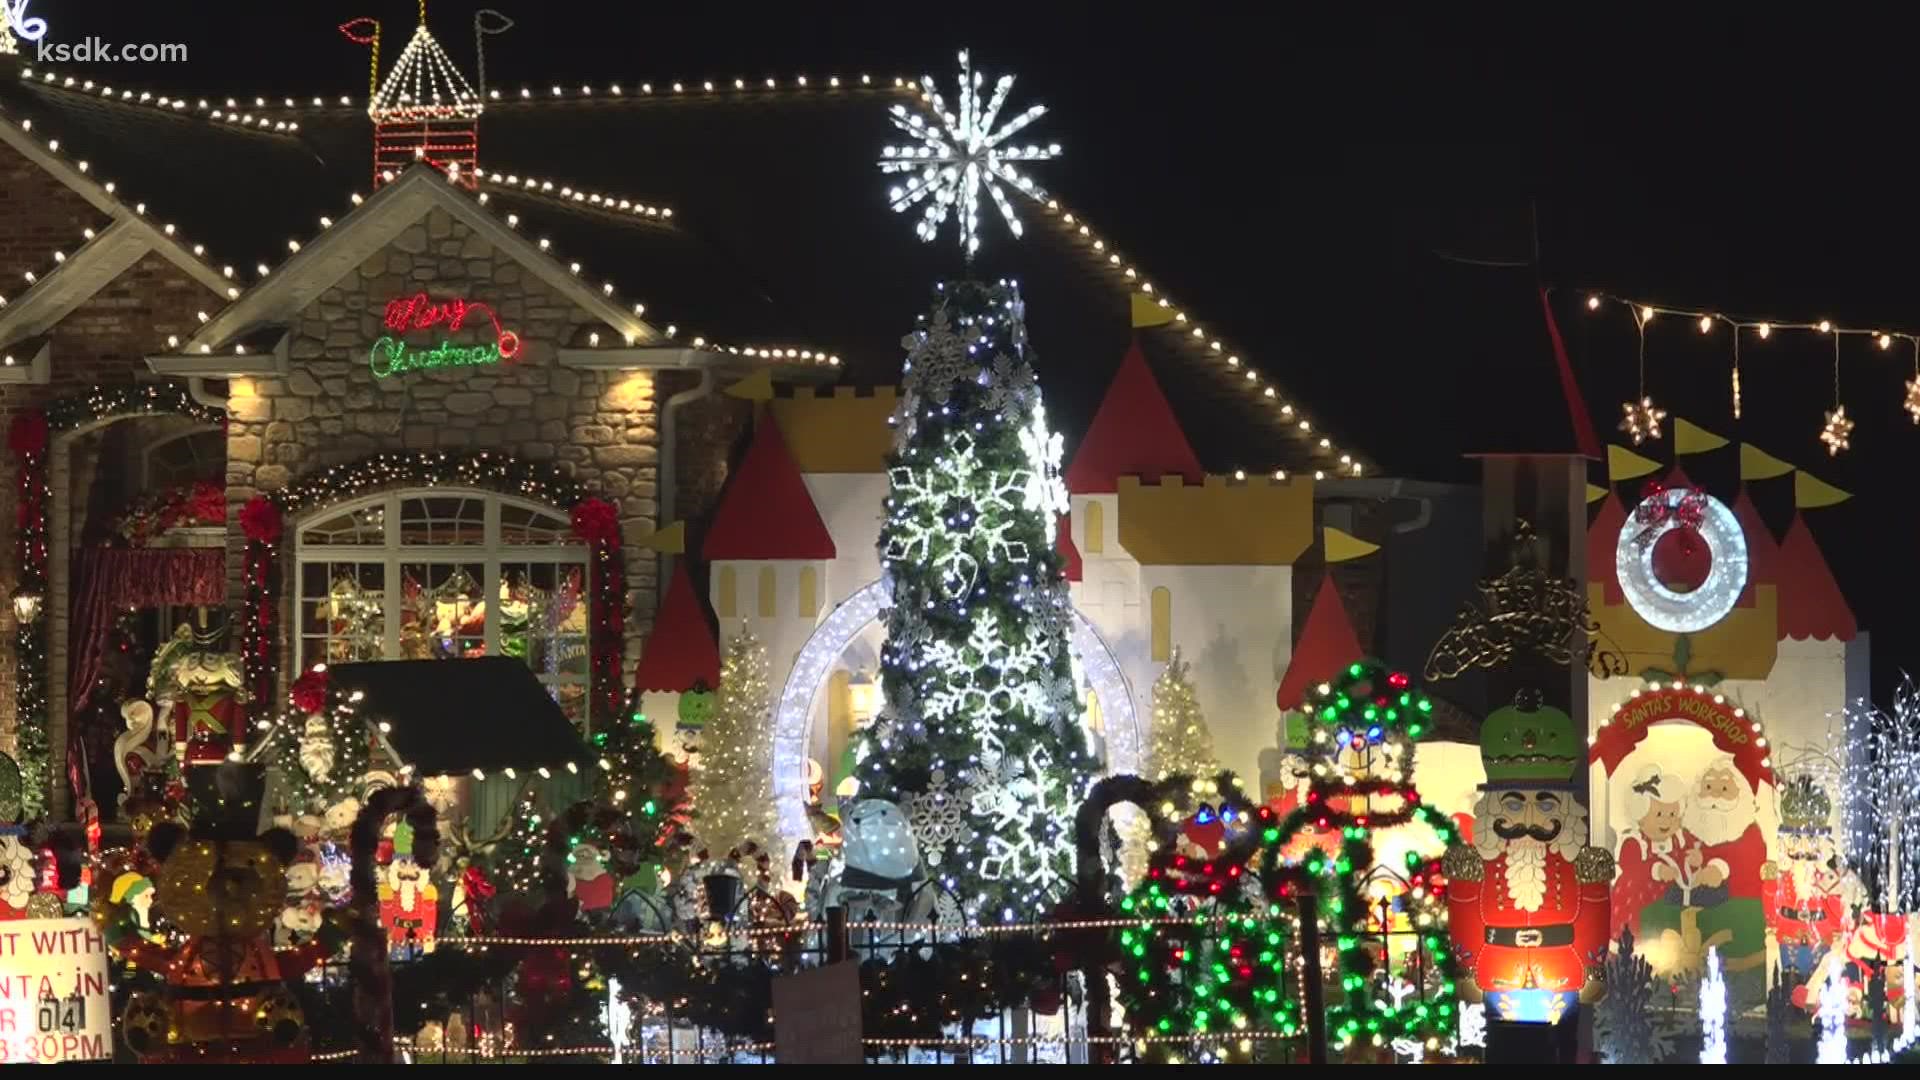 Each year, the Trevisano family uses their light display as an opportunity to raise money for the St. Patrick’s Center